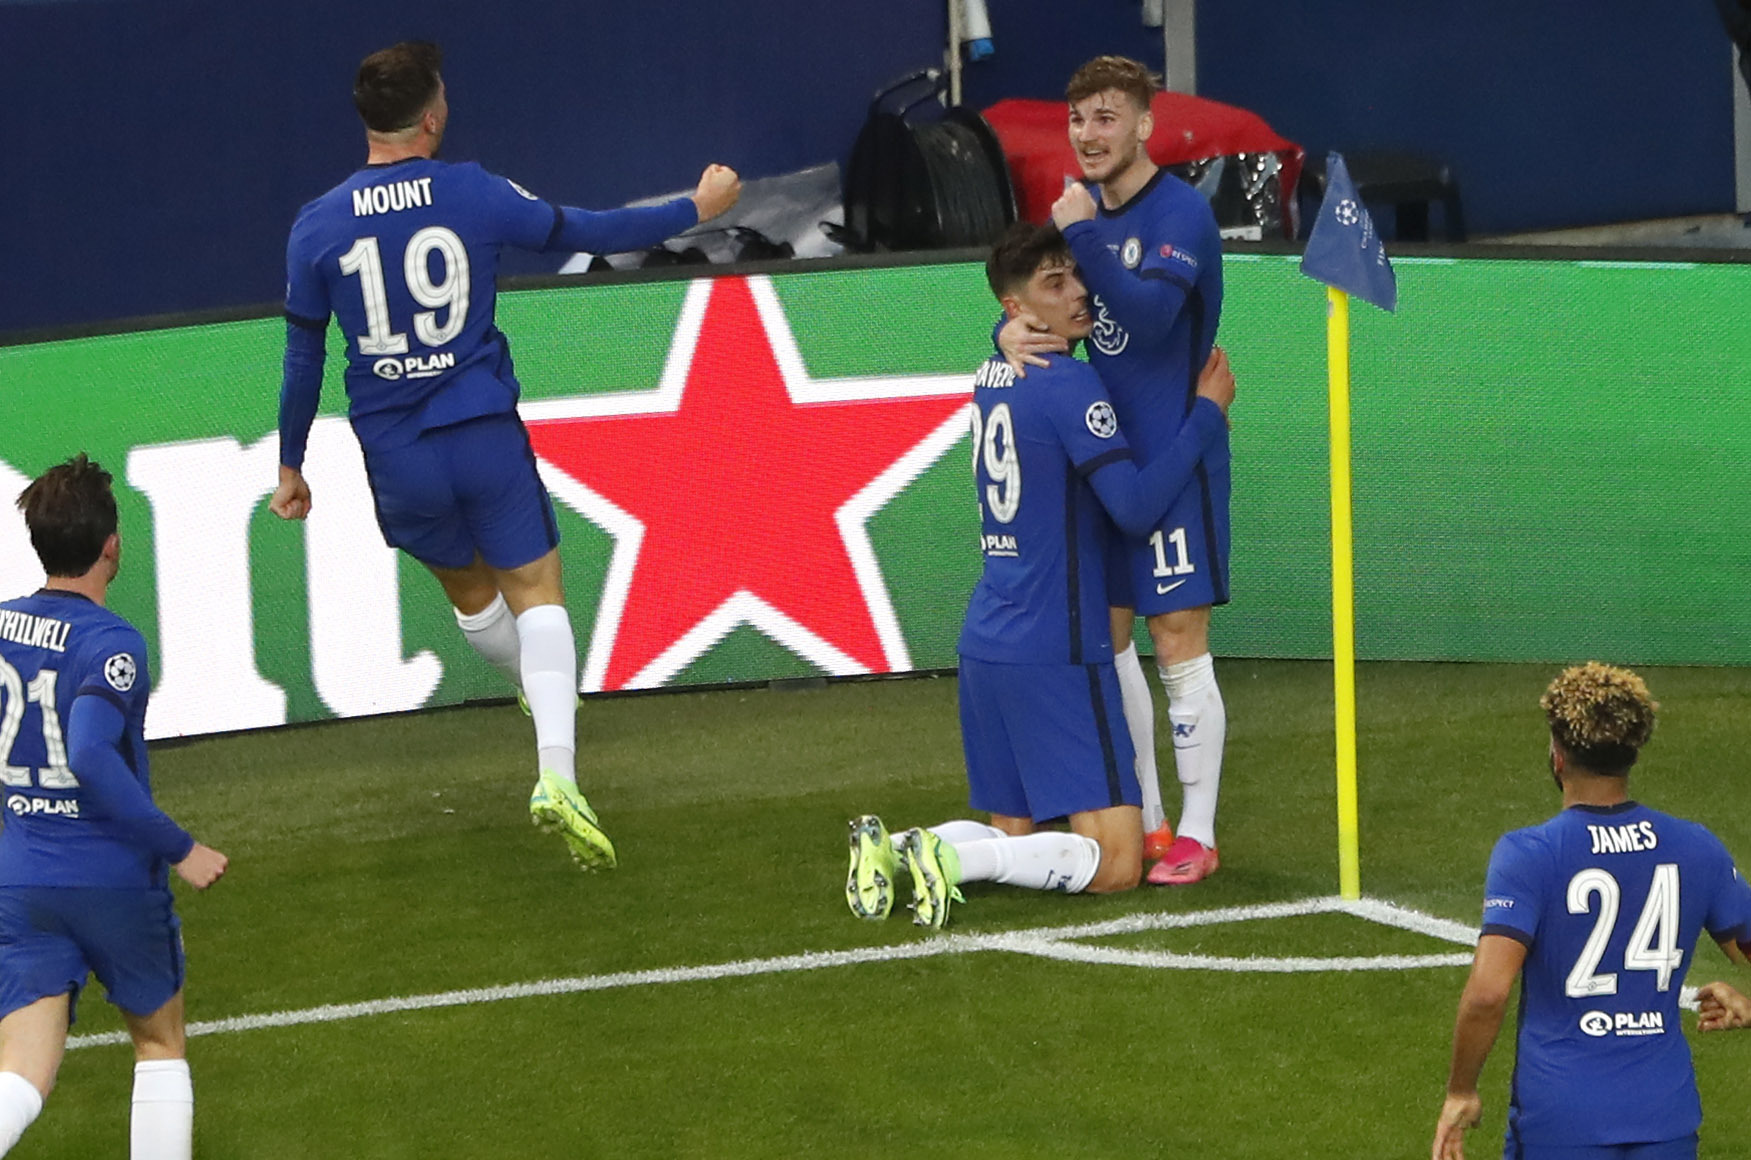 Chelsea beat Manchester City 1-0 to win Champions League